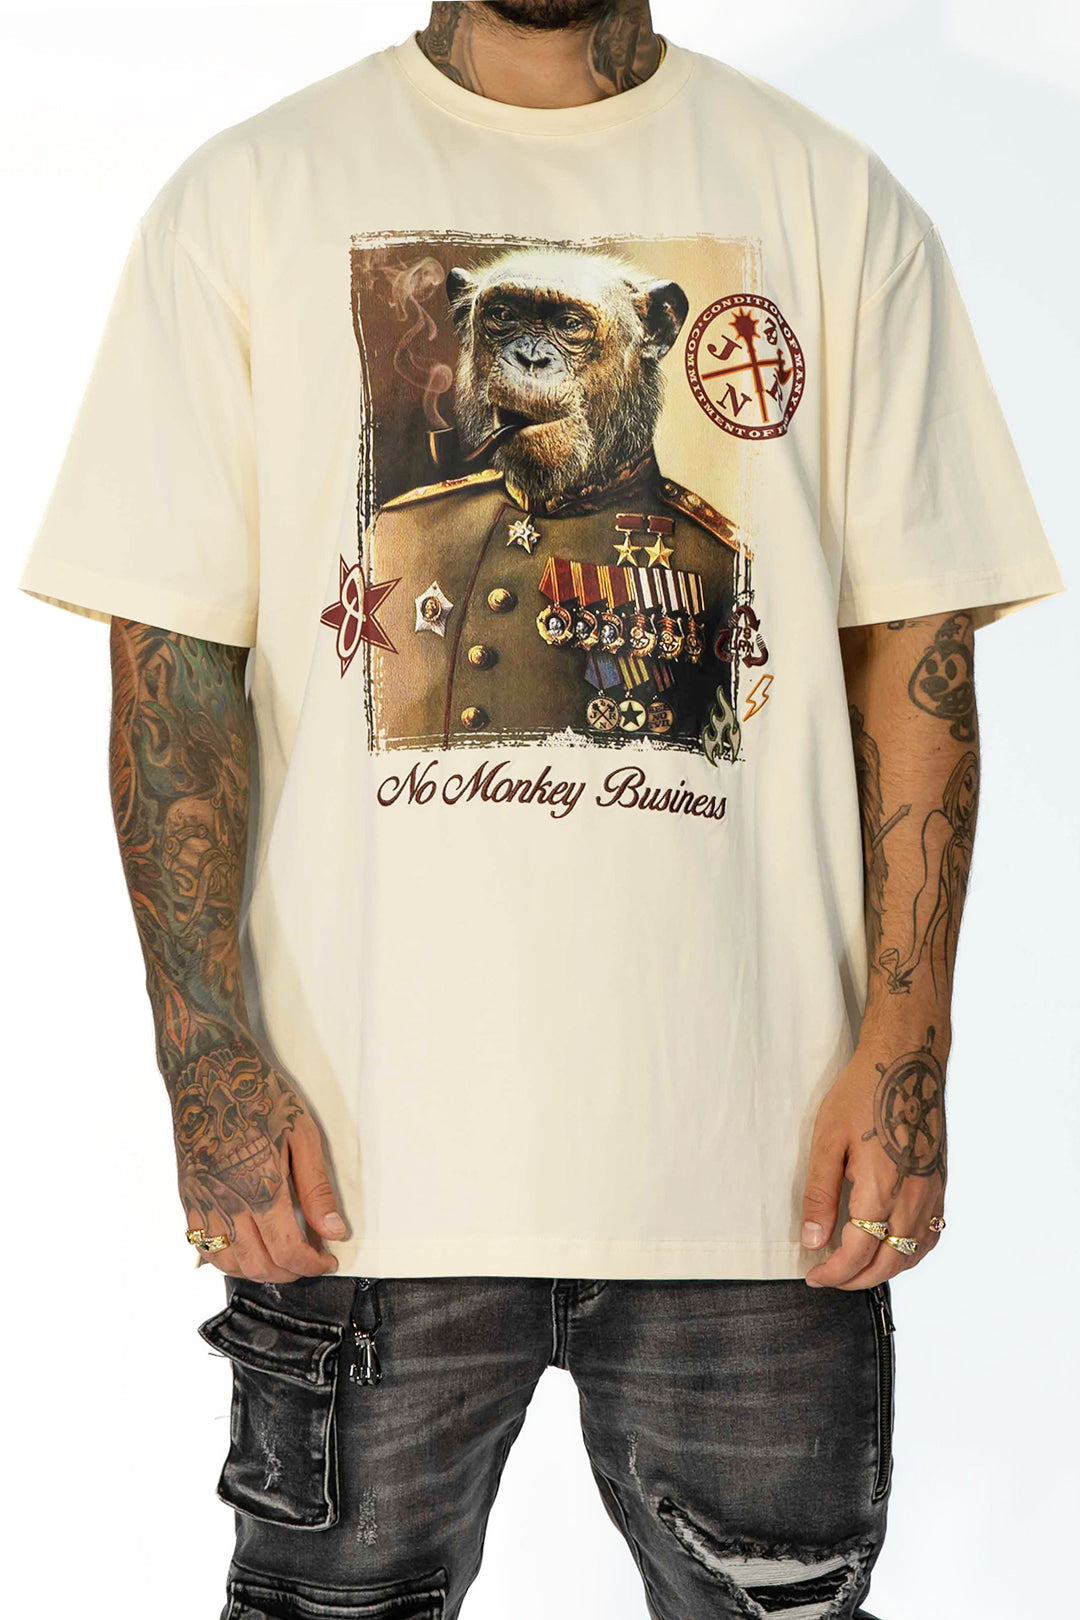 No Monkey Business Natural Tee